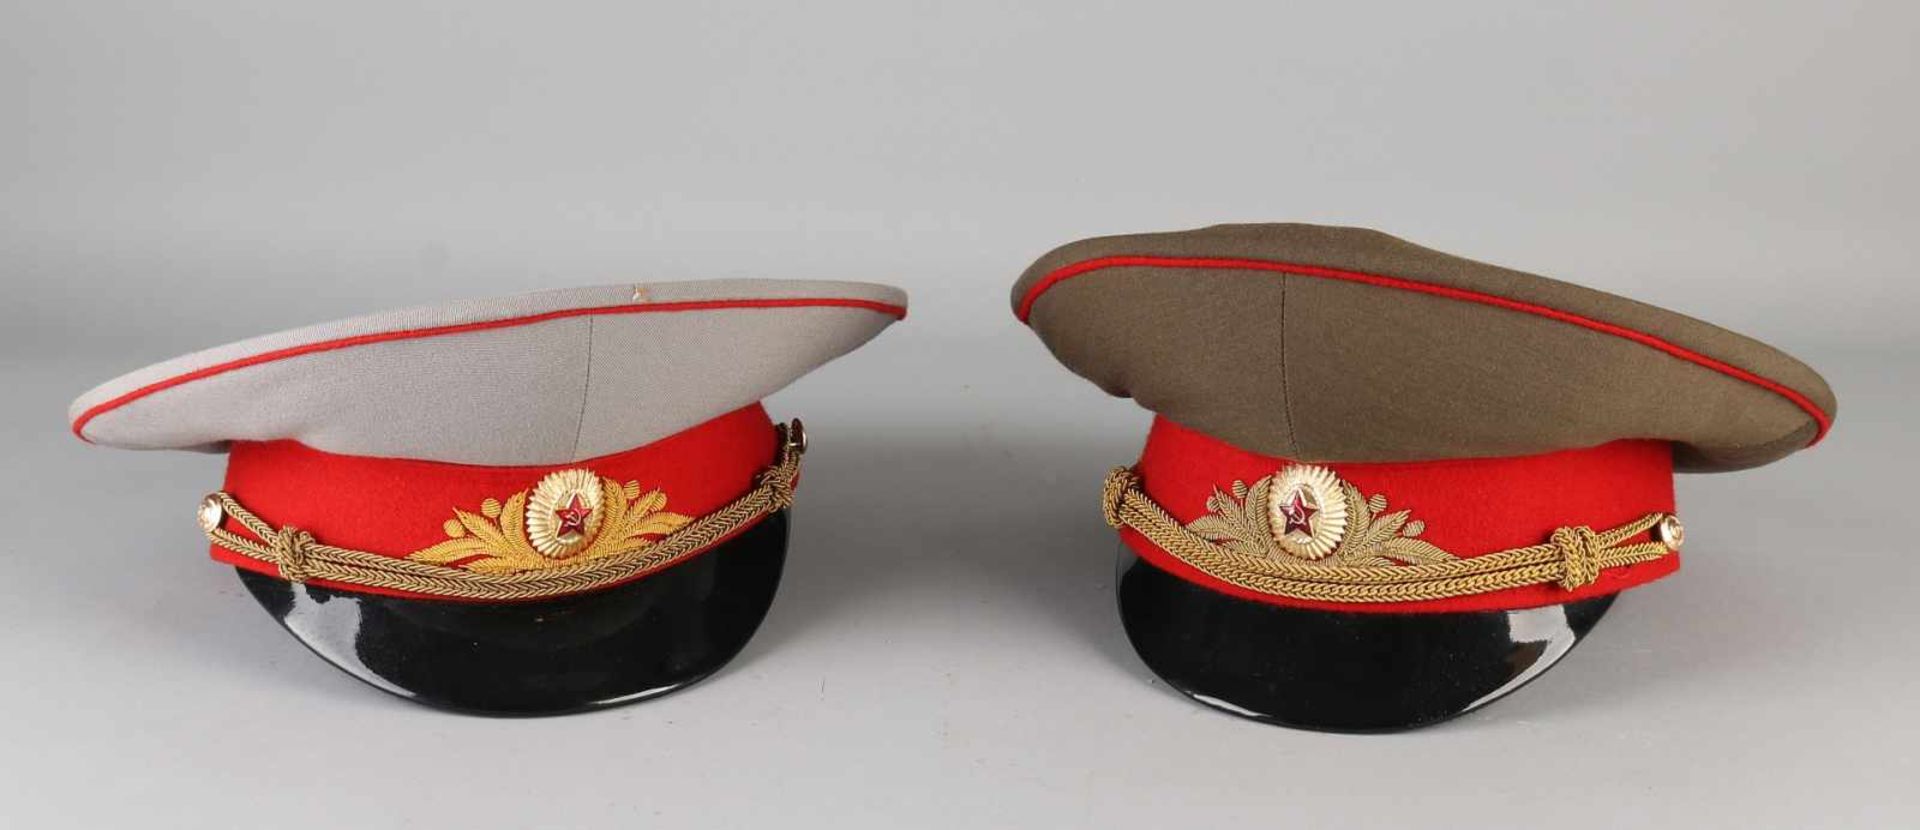 Two original Russian general caps. Duty and parade cap. Second half 20th century. Size: 15 x Ø 30